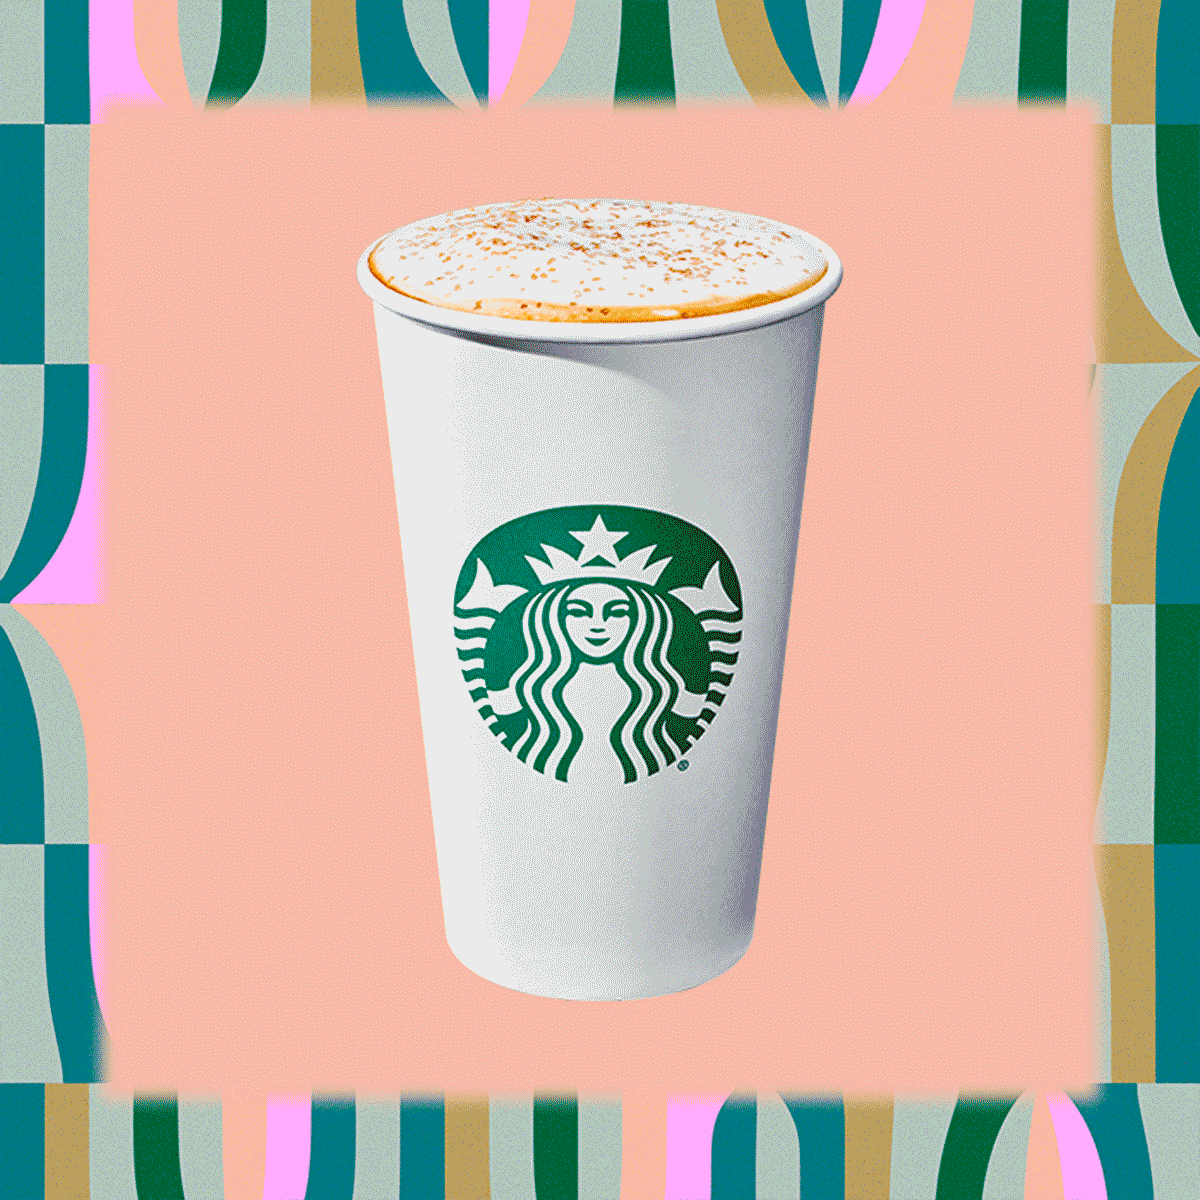 Here are all the items on the leaked Starbucks winter menu